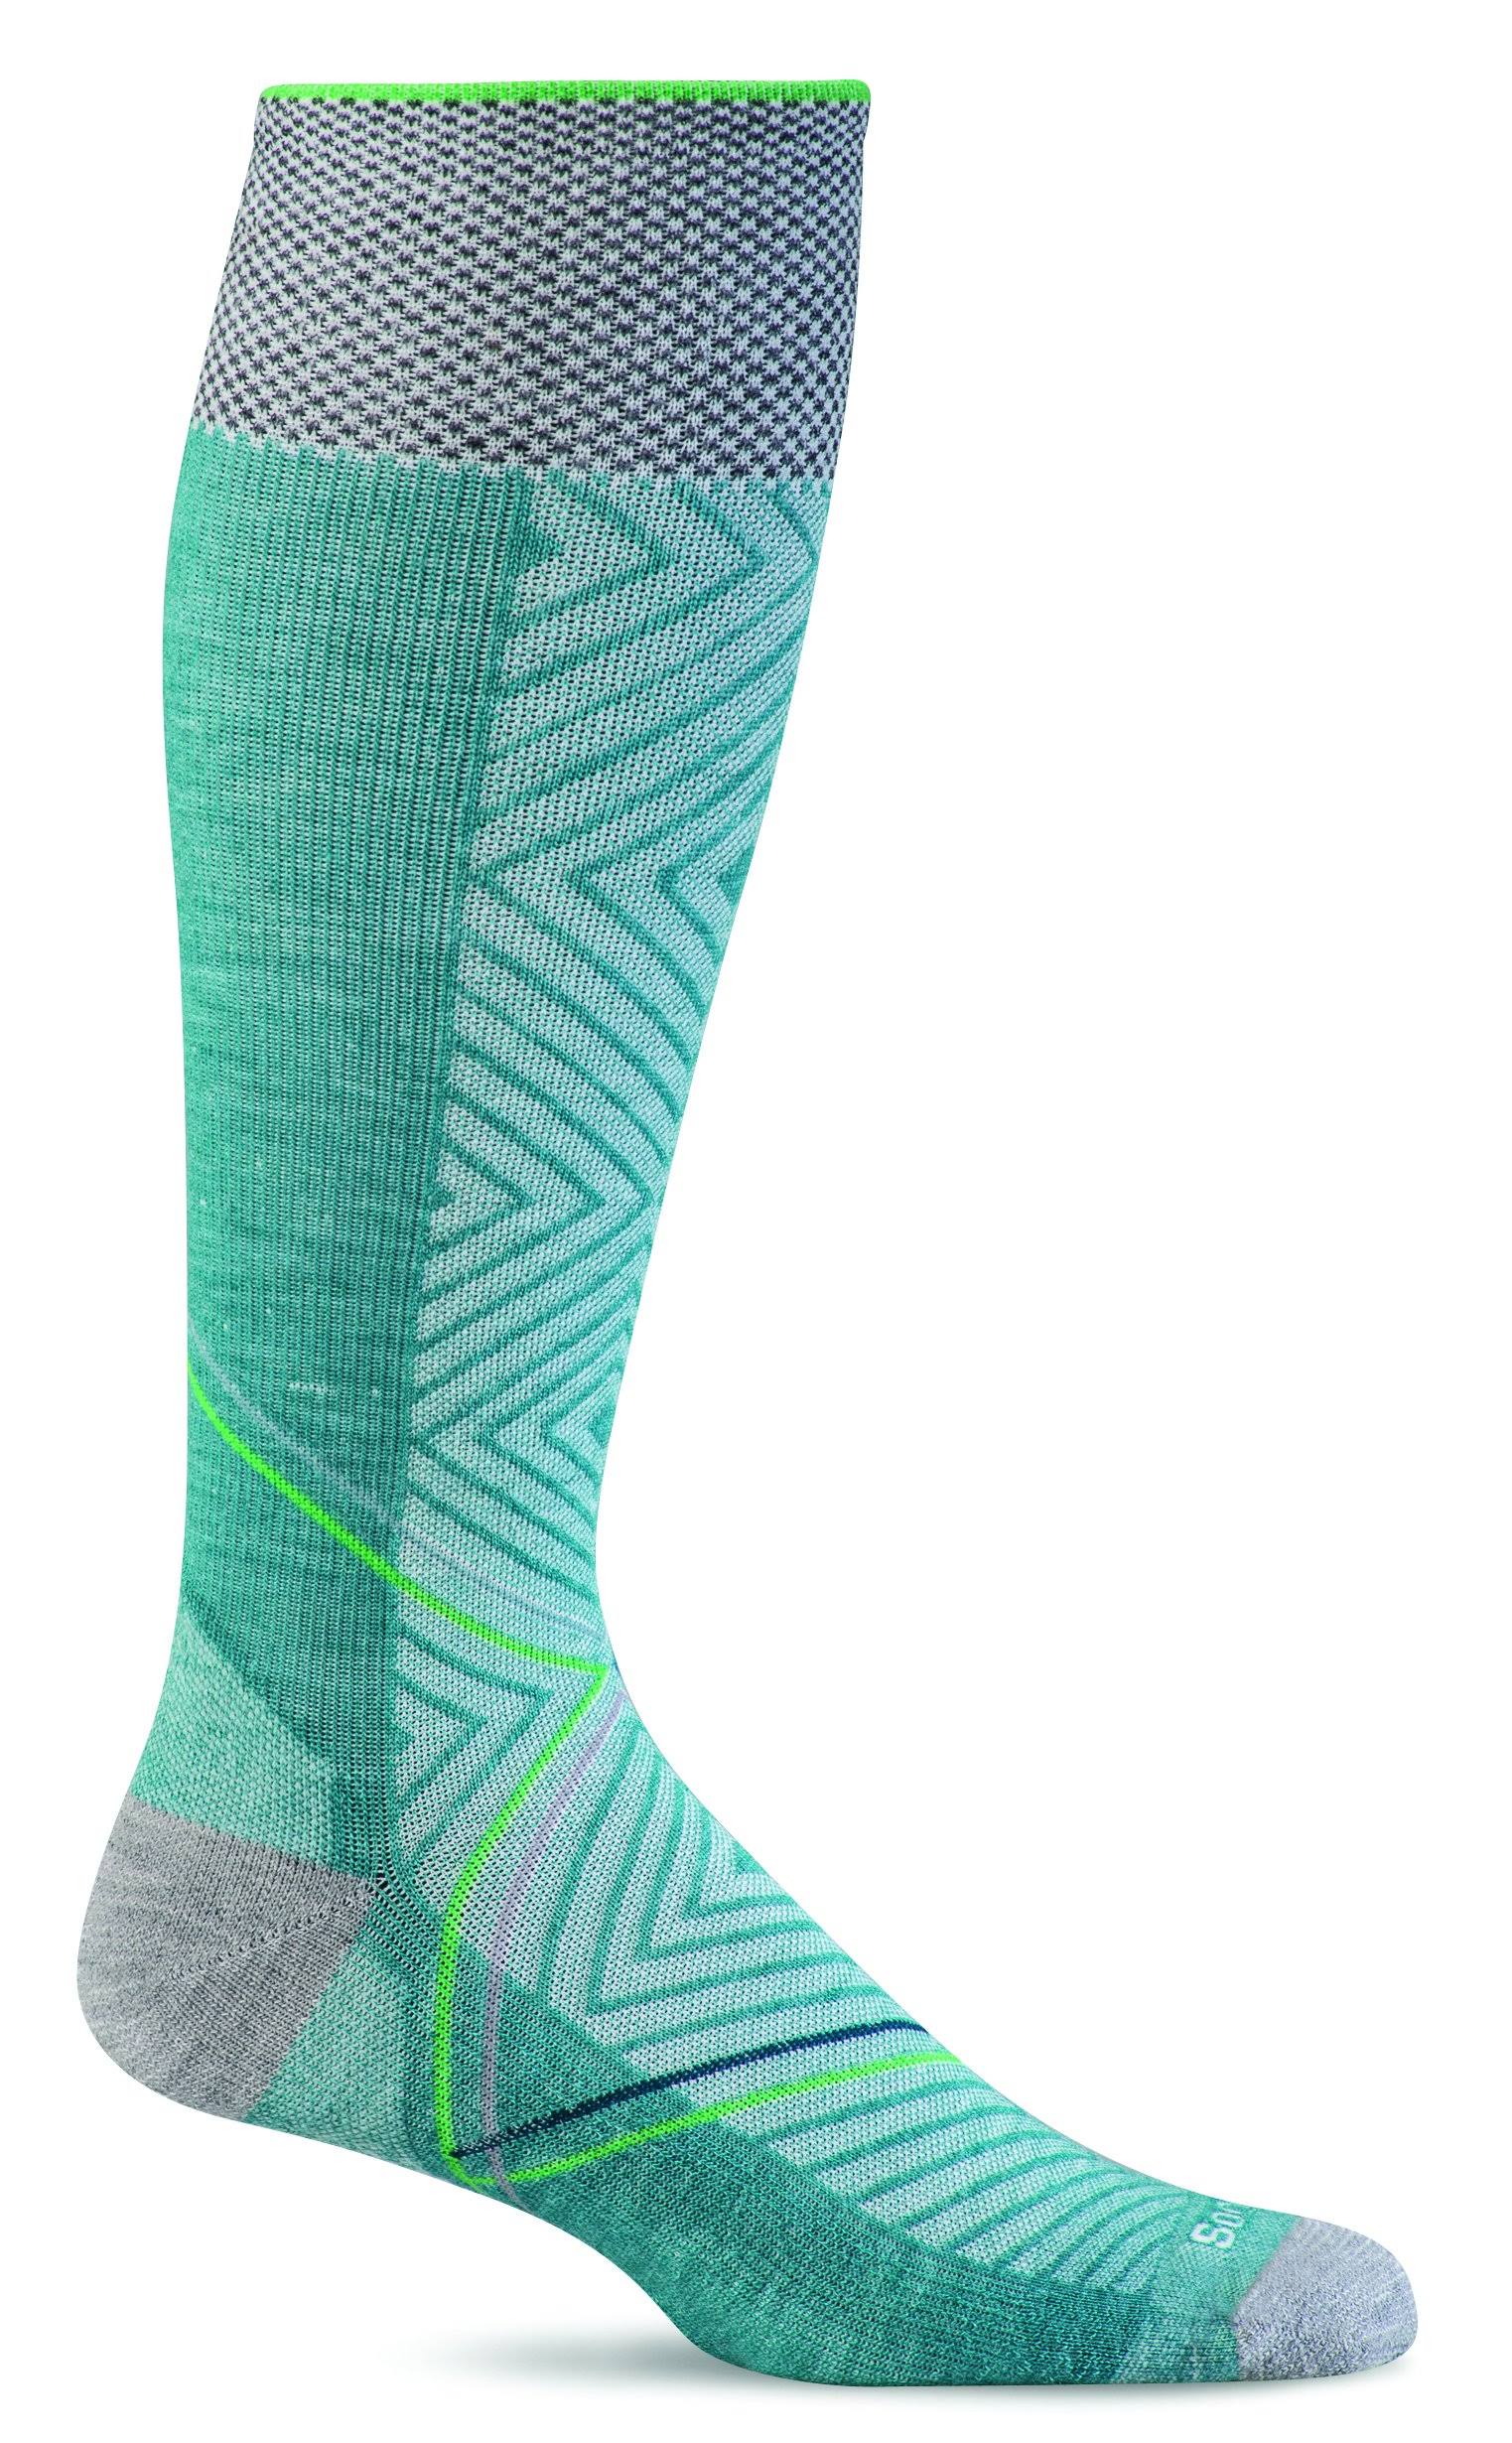 Sockwell Women's Pulse Firm Compression Socks, Mineral, Small